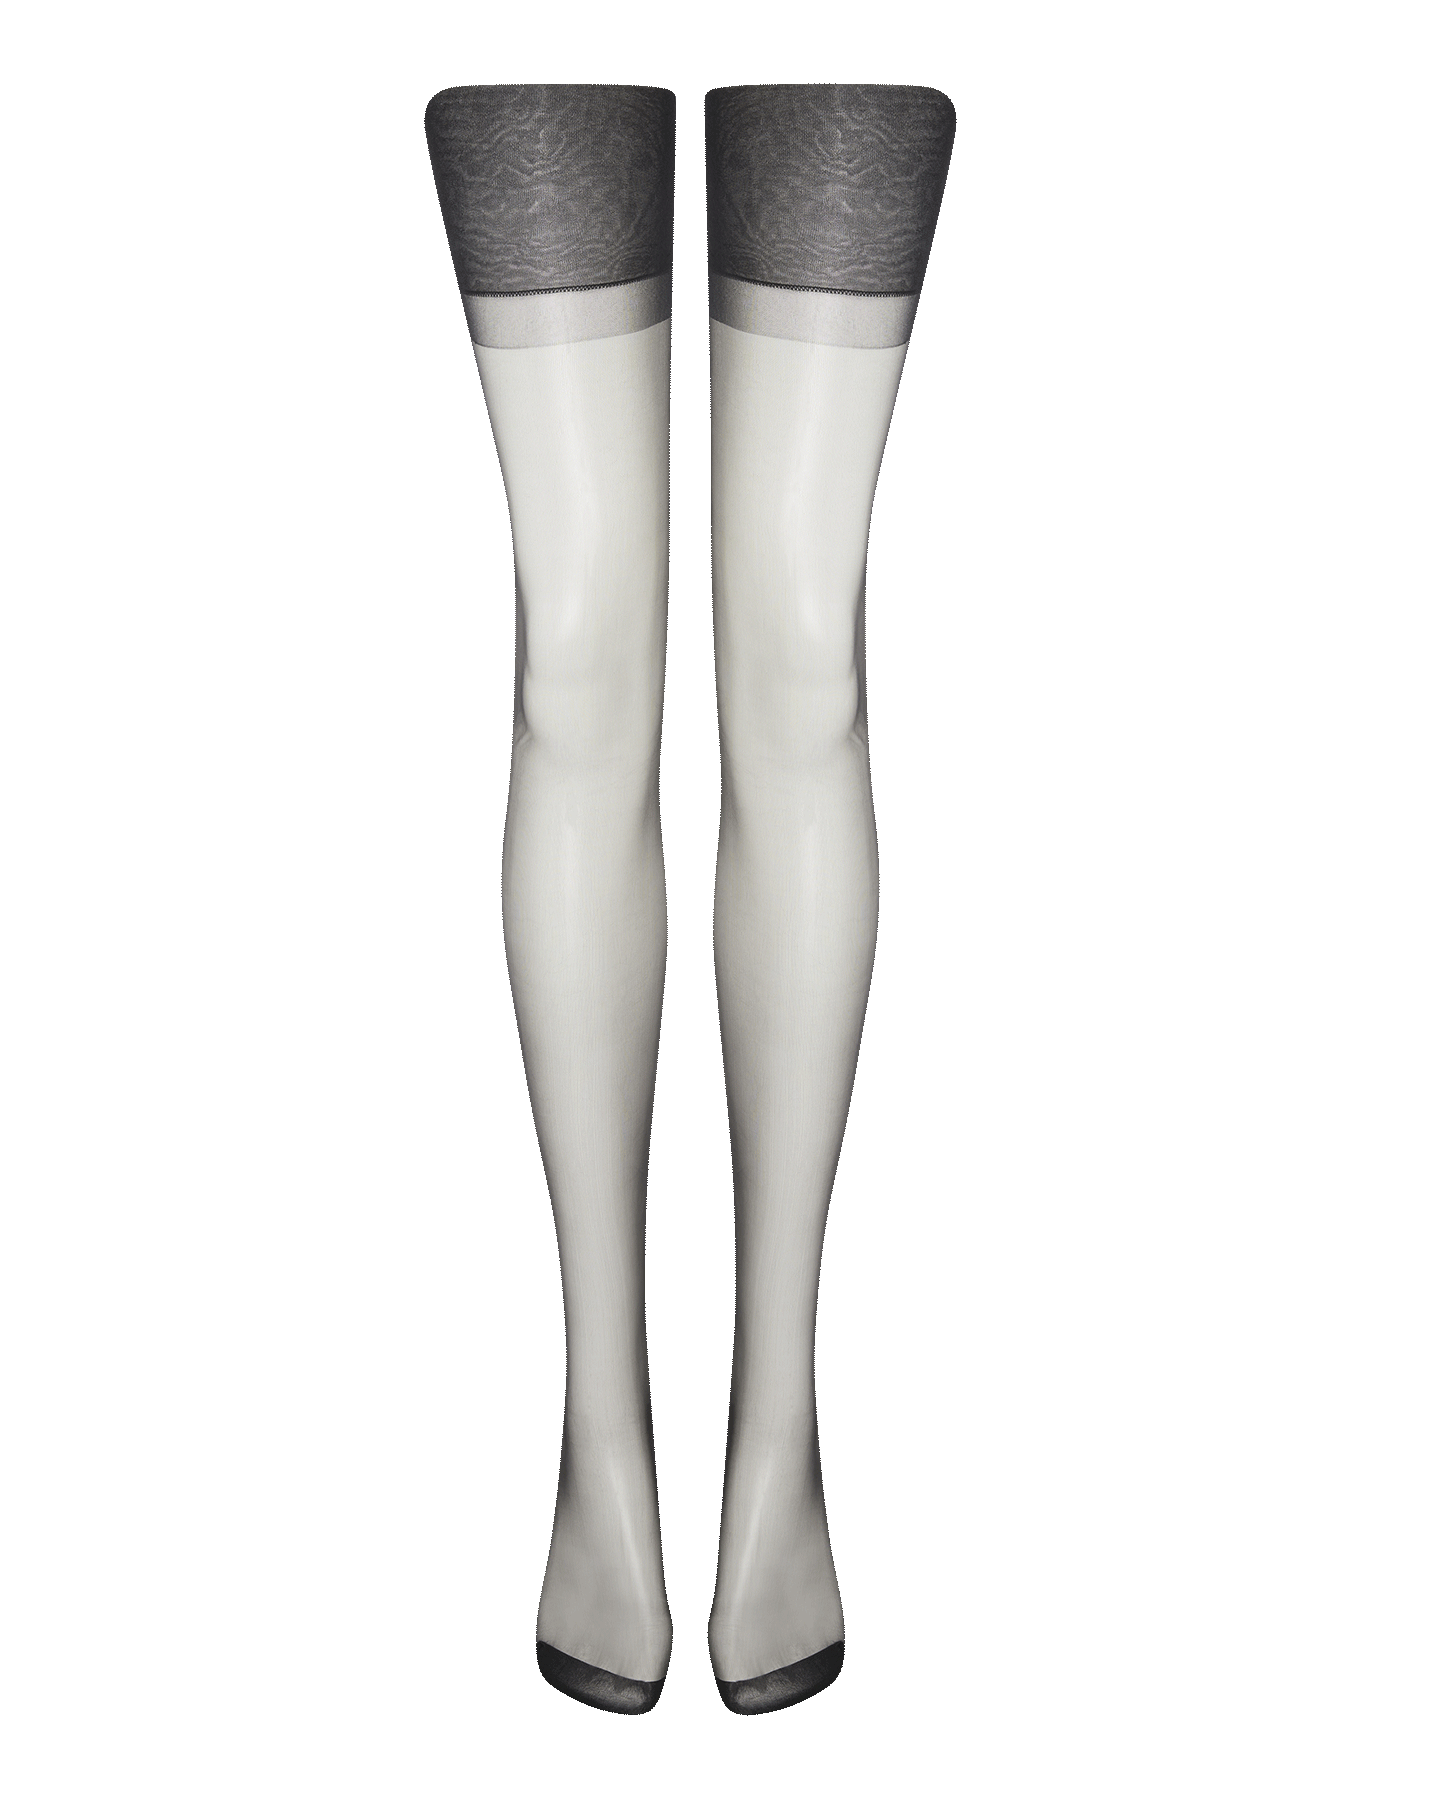 Opale Stockings in Black | By Agent Provocateur